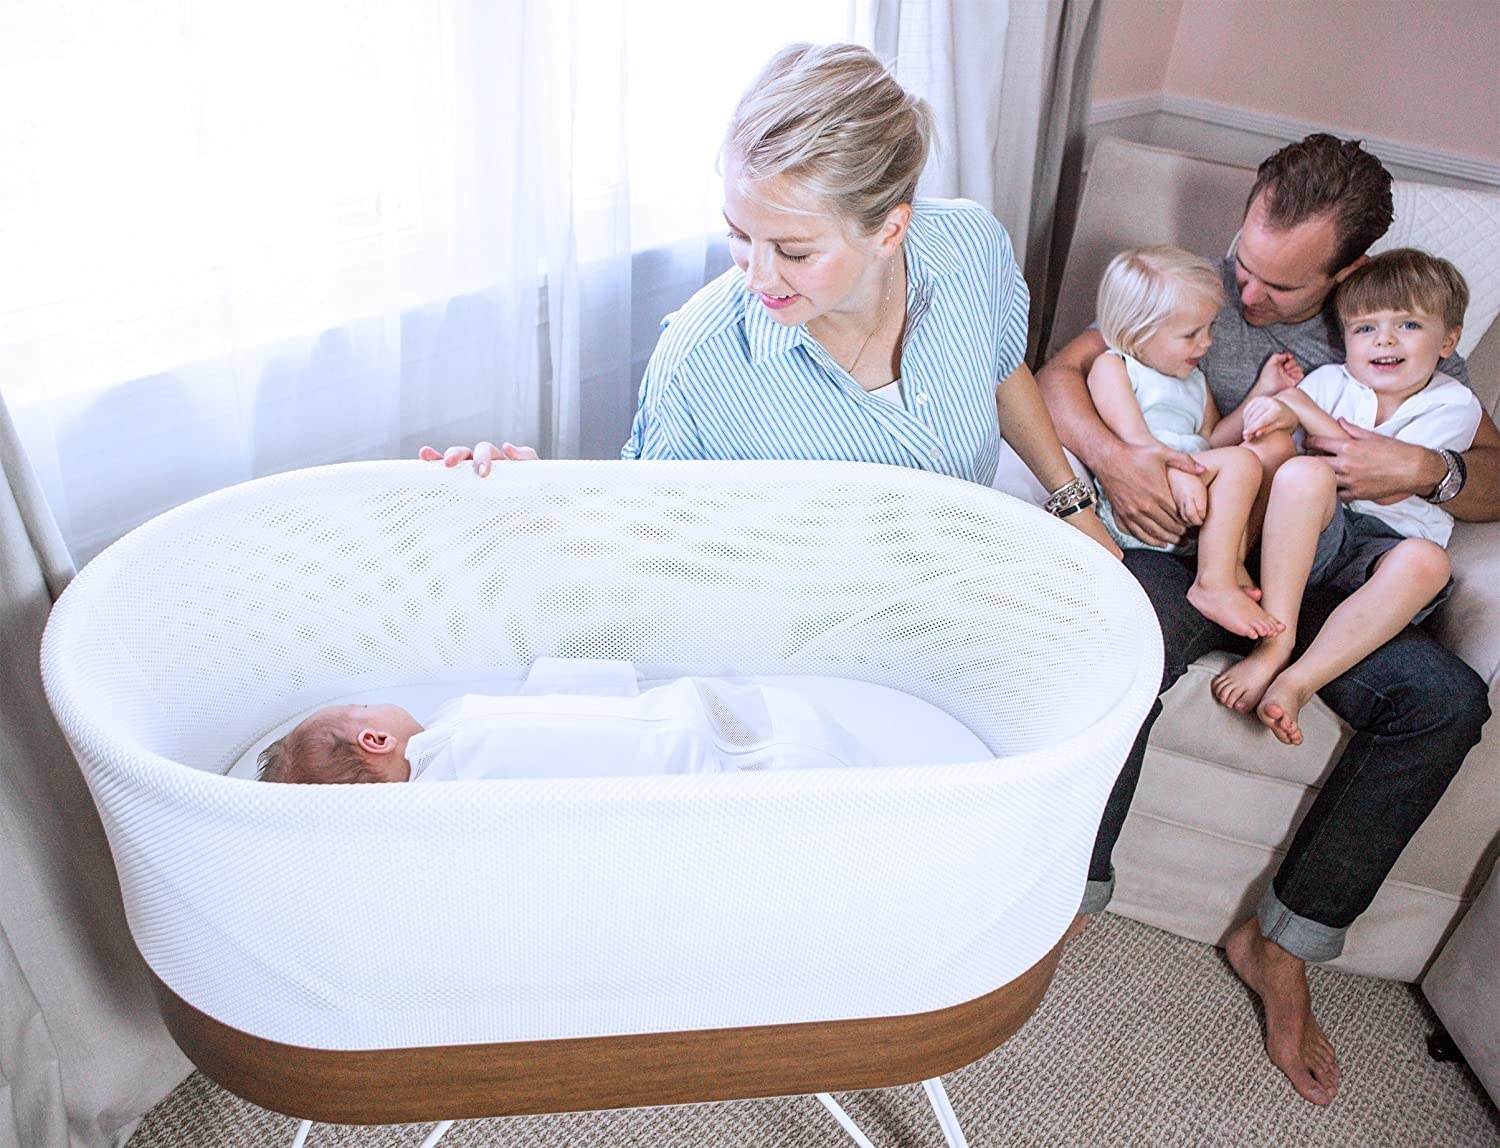 The oval-shaped bassinet in white with a wood bottom and white legs